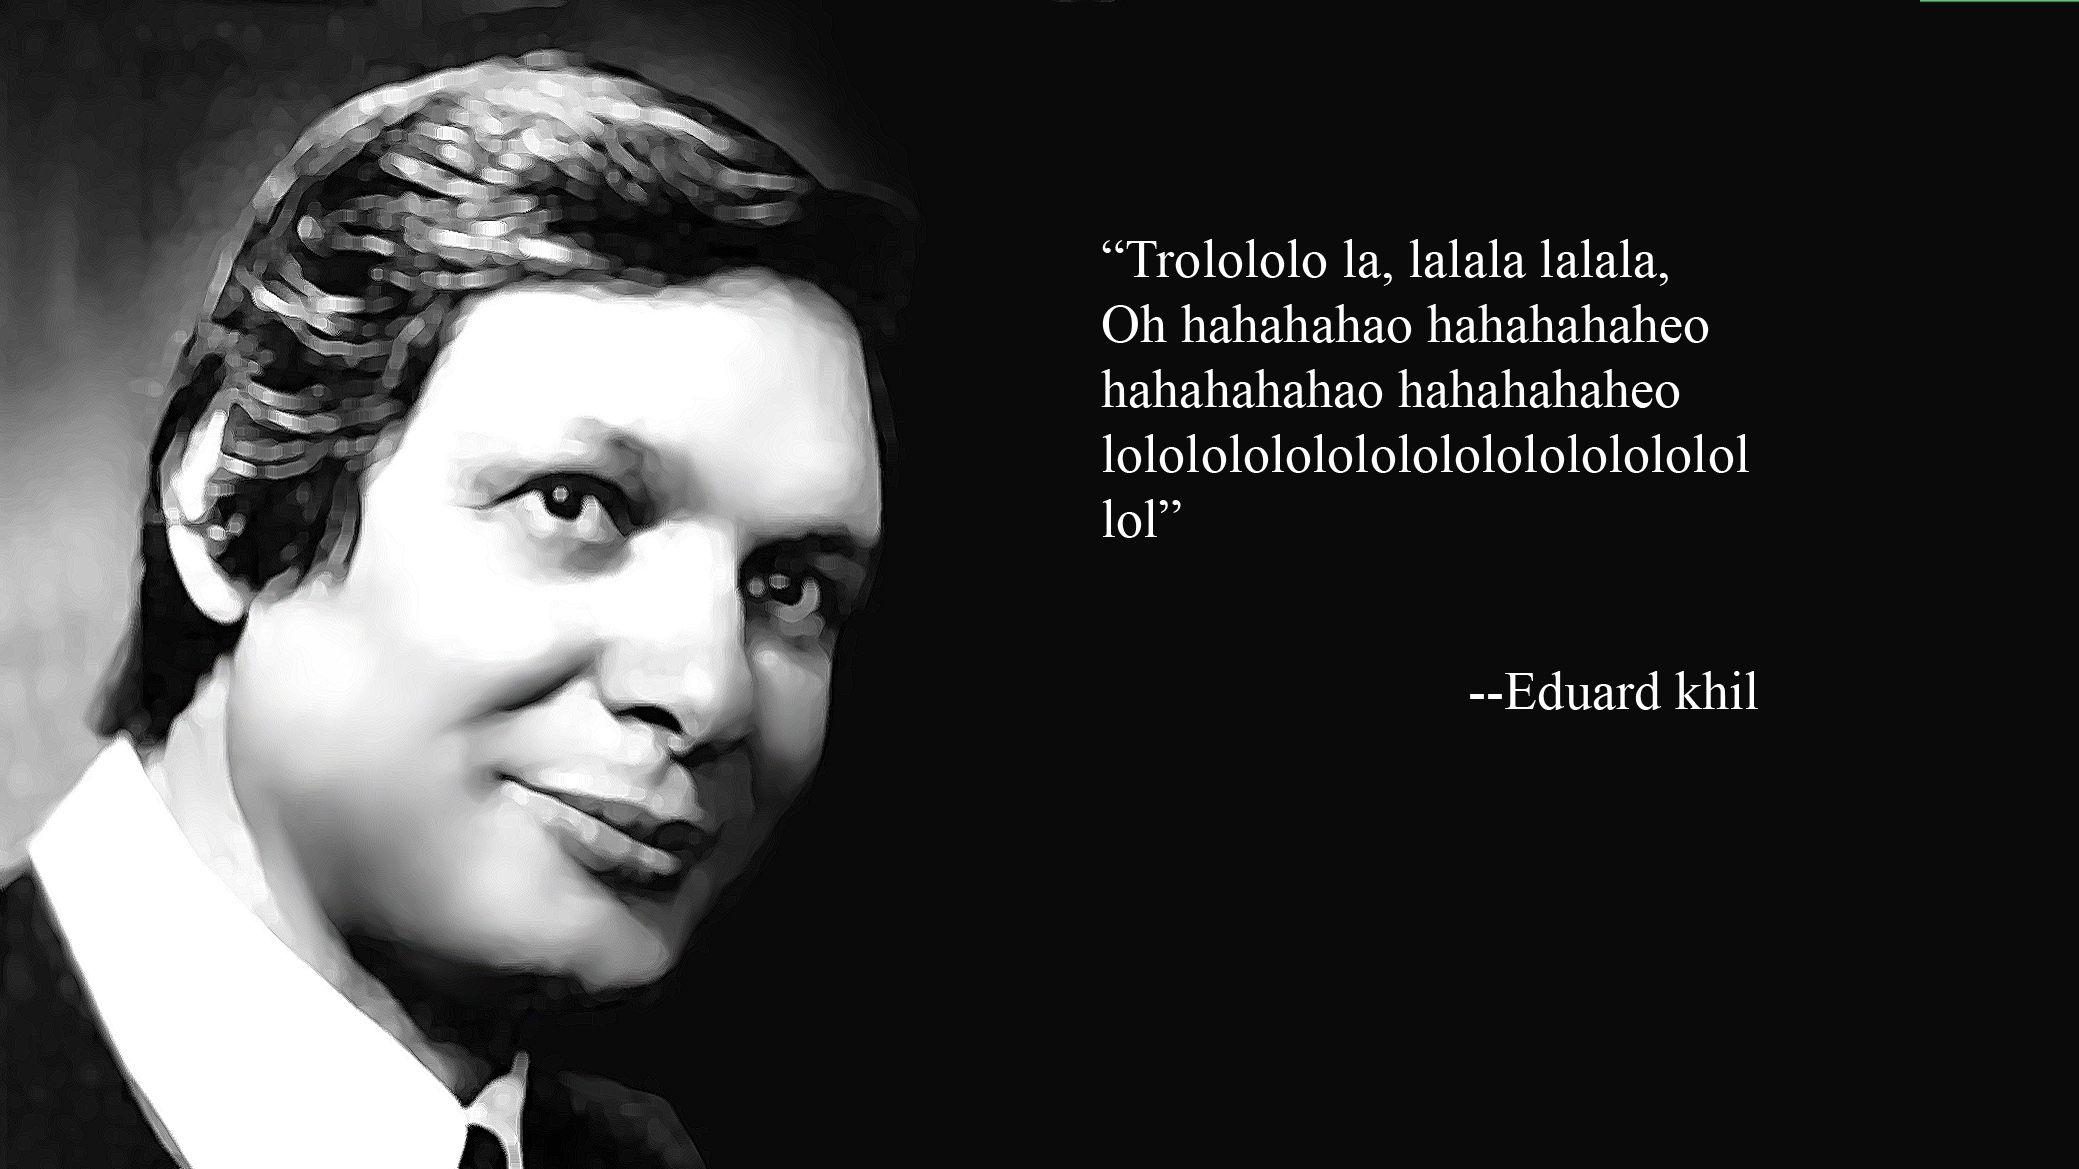 thank you - added by IshimelofSomewhere at RIP Eduard Khil